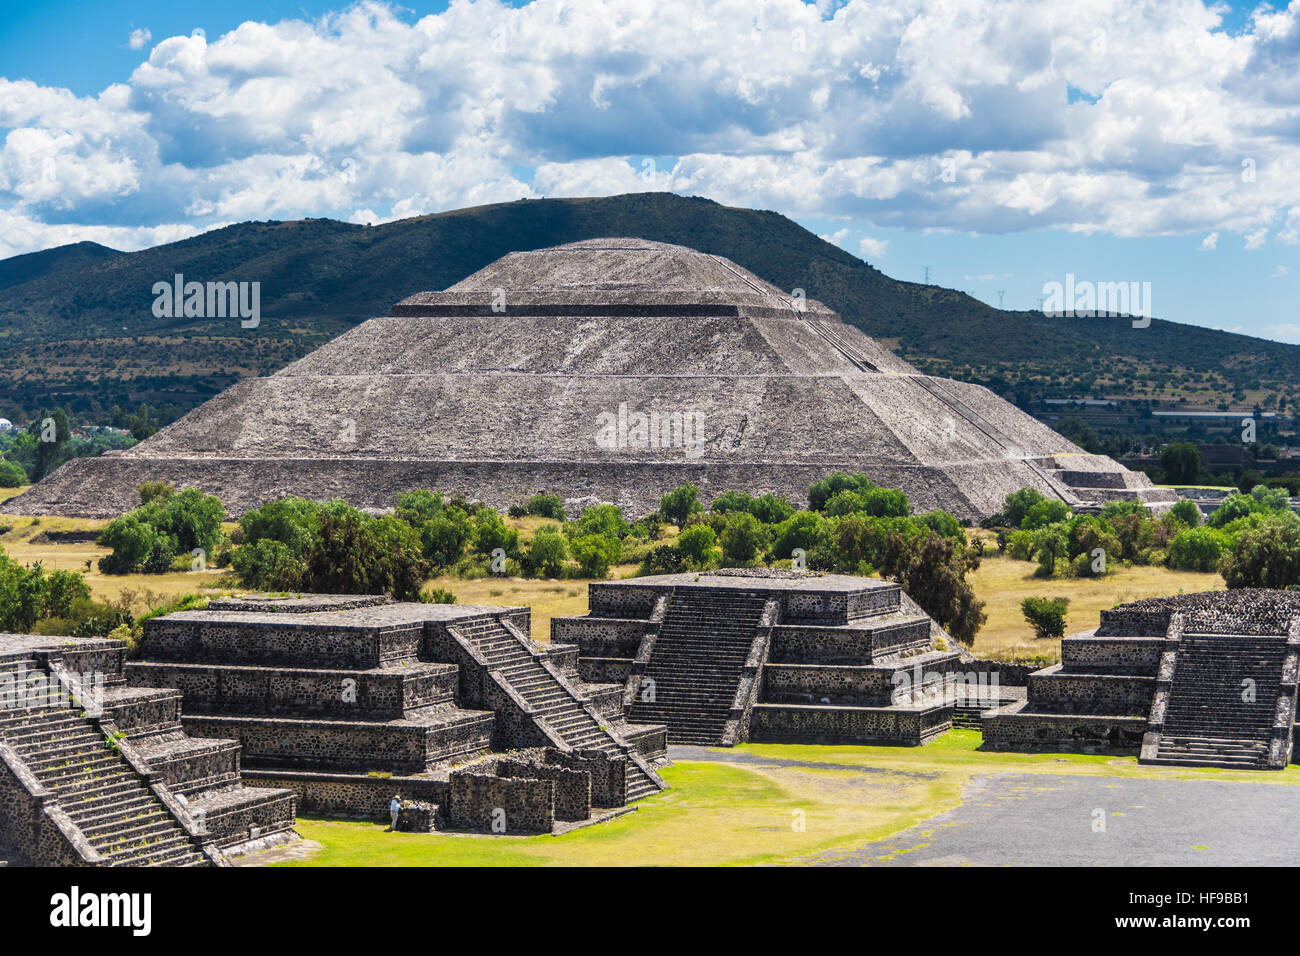 Pyramid of the Sun seen from Pyramid of the Moon on a sunny day, in Teotihuacan, near Mexico City, Mexico. Stock Photo